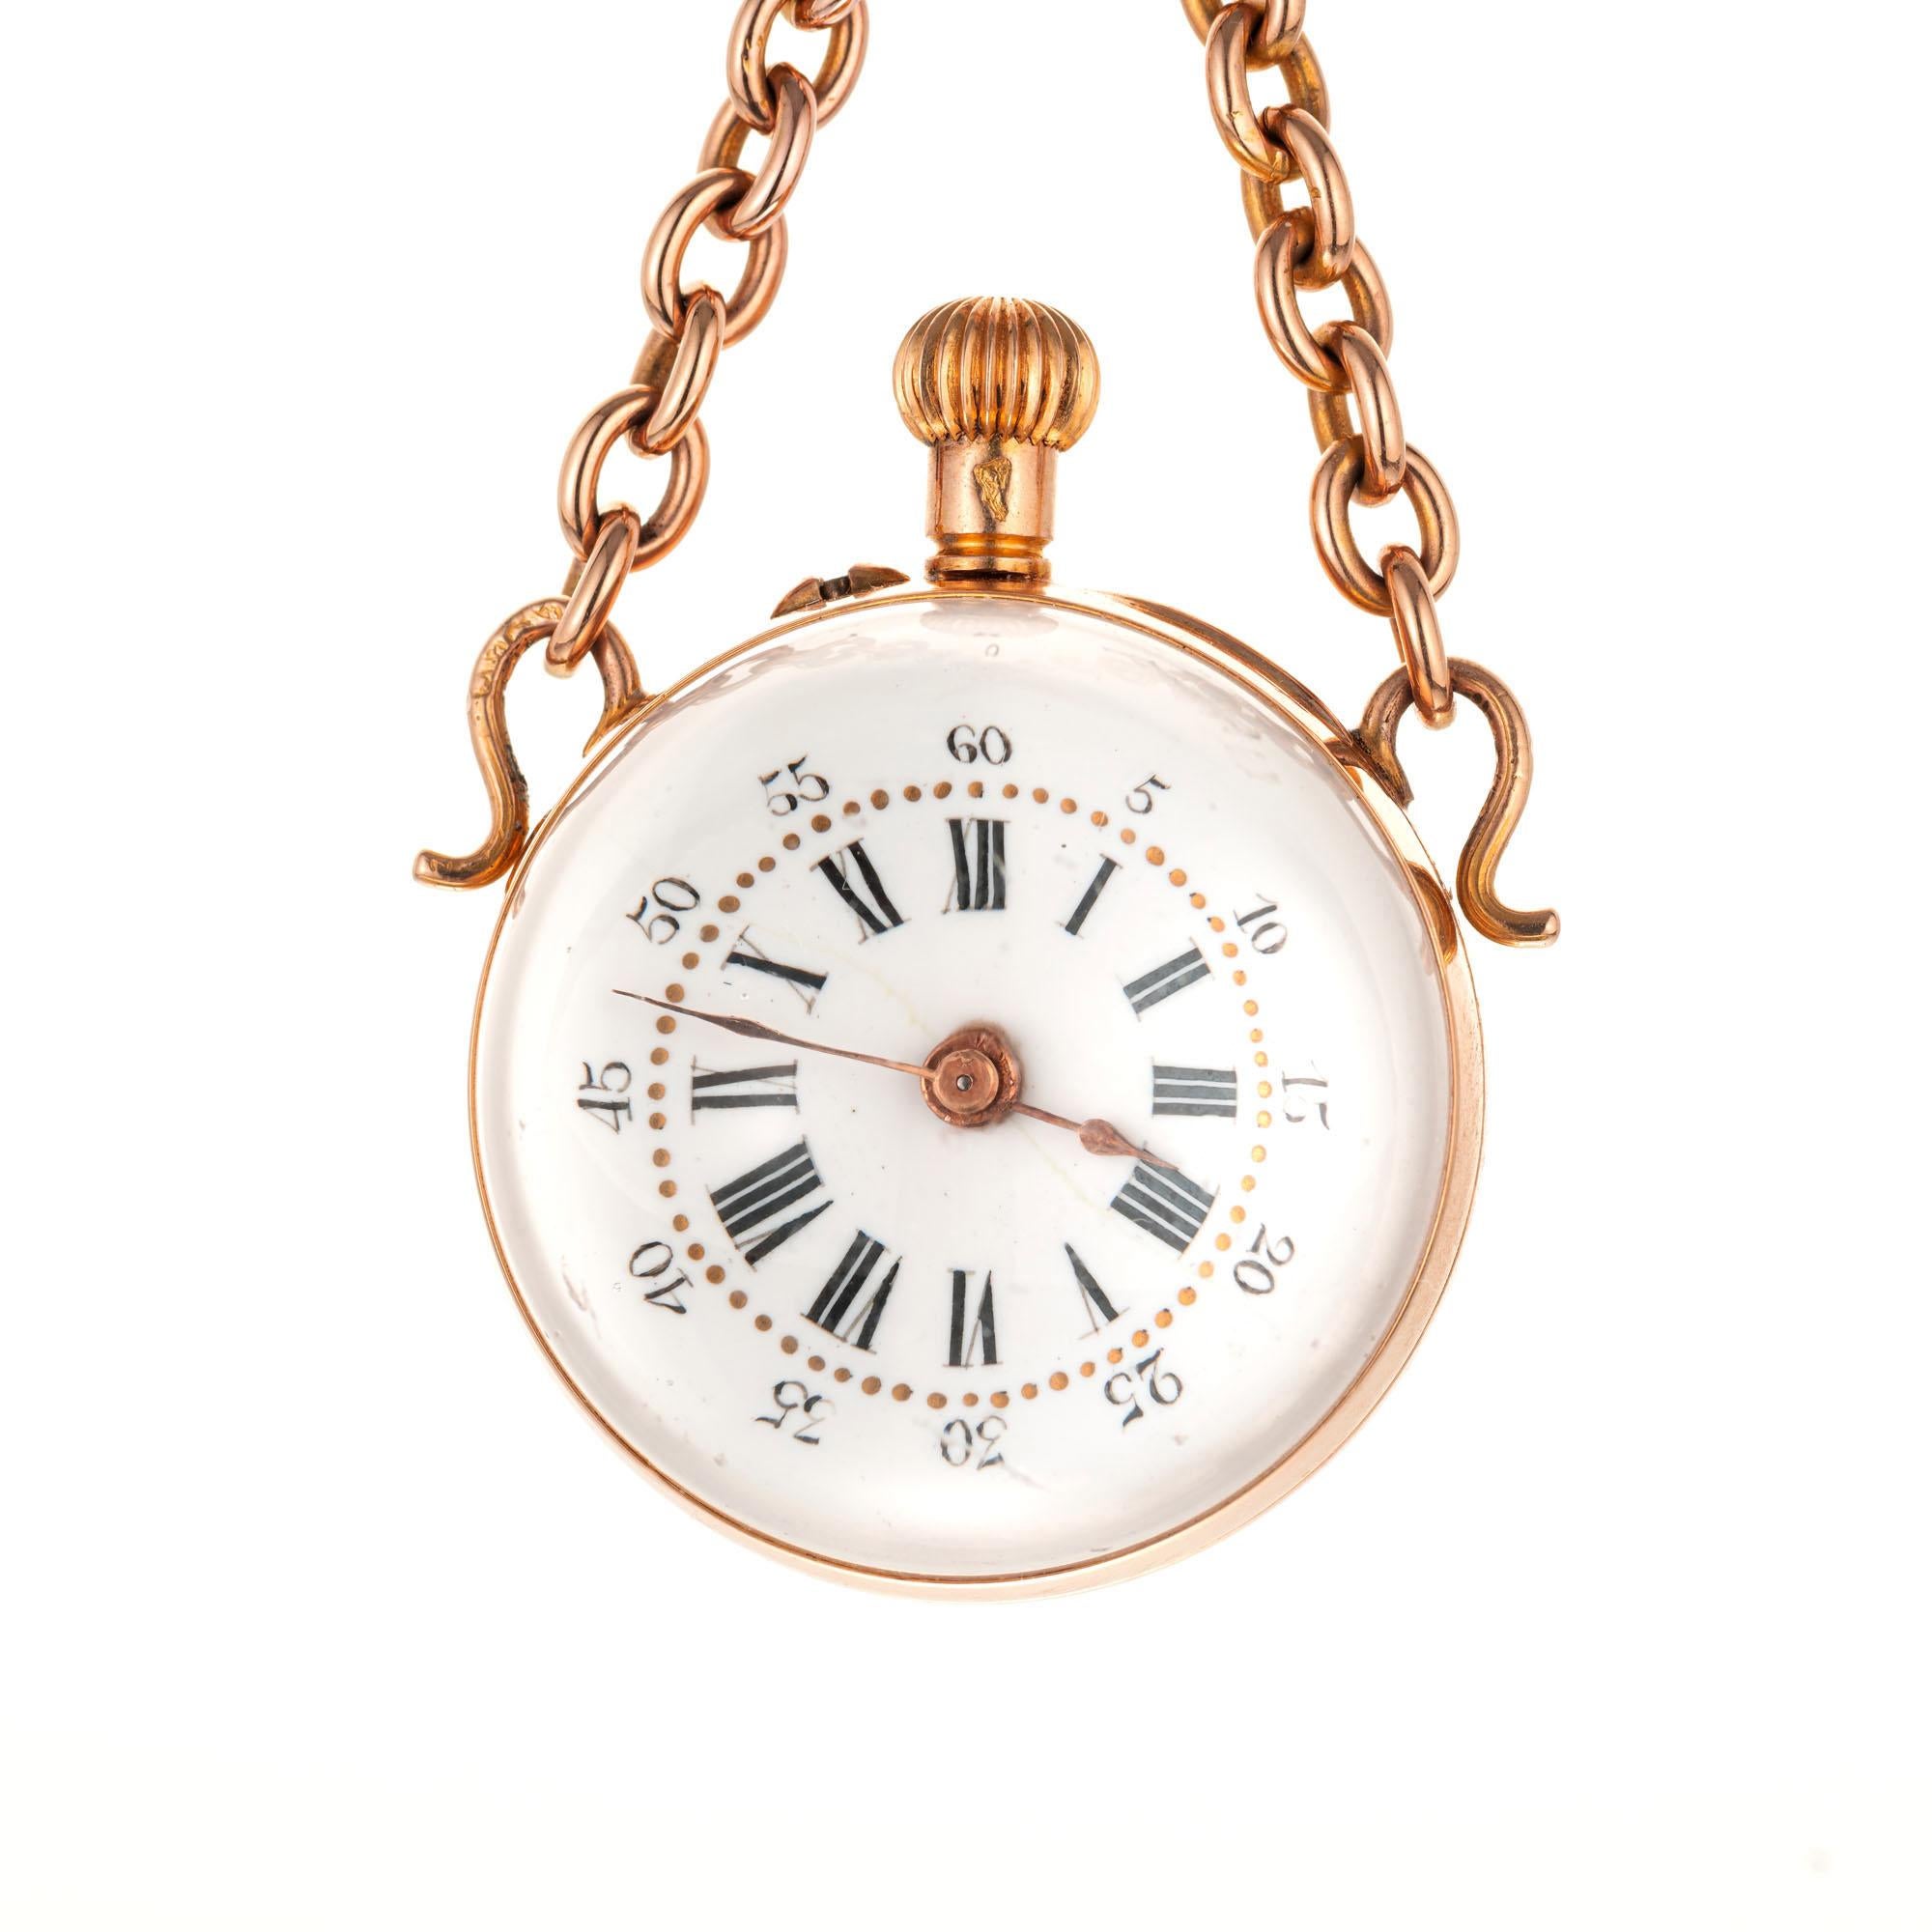 circa 1880-1890 Crystal ball watch with a 20-Inch-long solid rose gold chain with a swivel catch that can be worn alone. You can also attach the crystal ball watch to the swivel or at the end of the chain.

14k rose gold
9k rose gold
Length: 20 inch